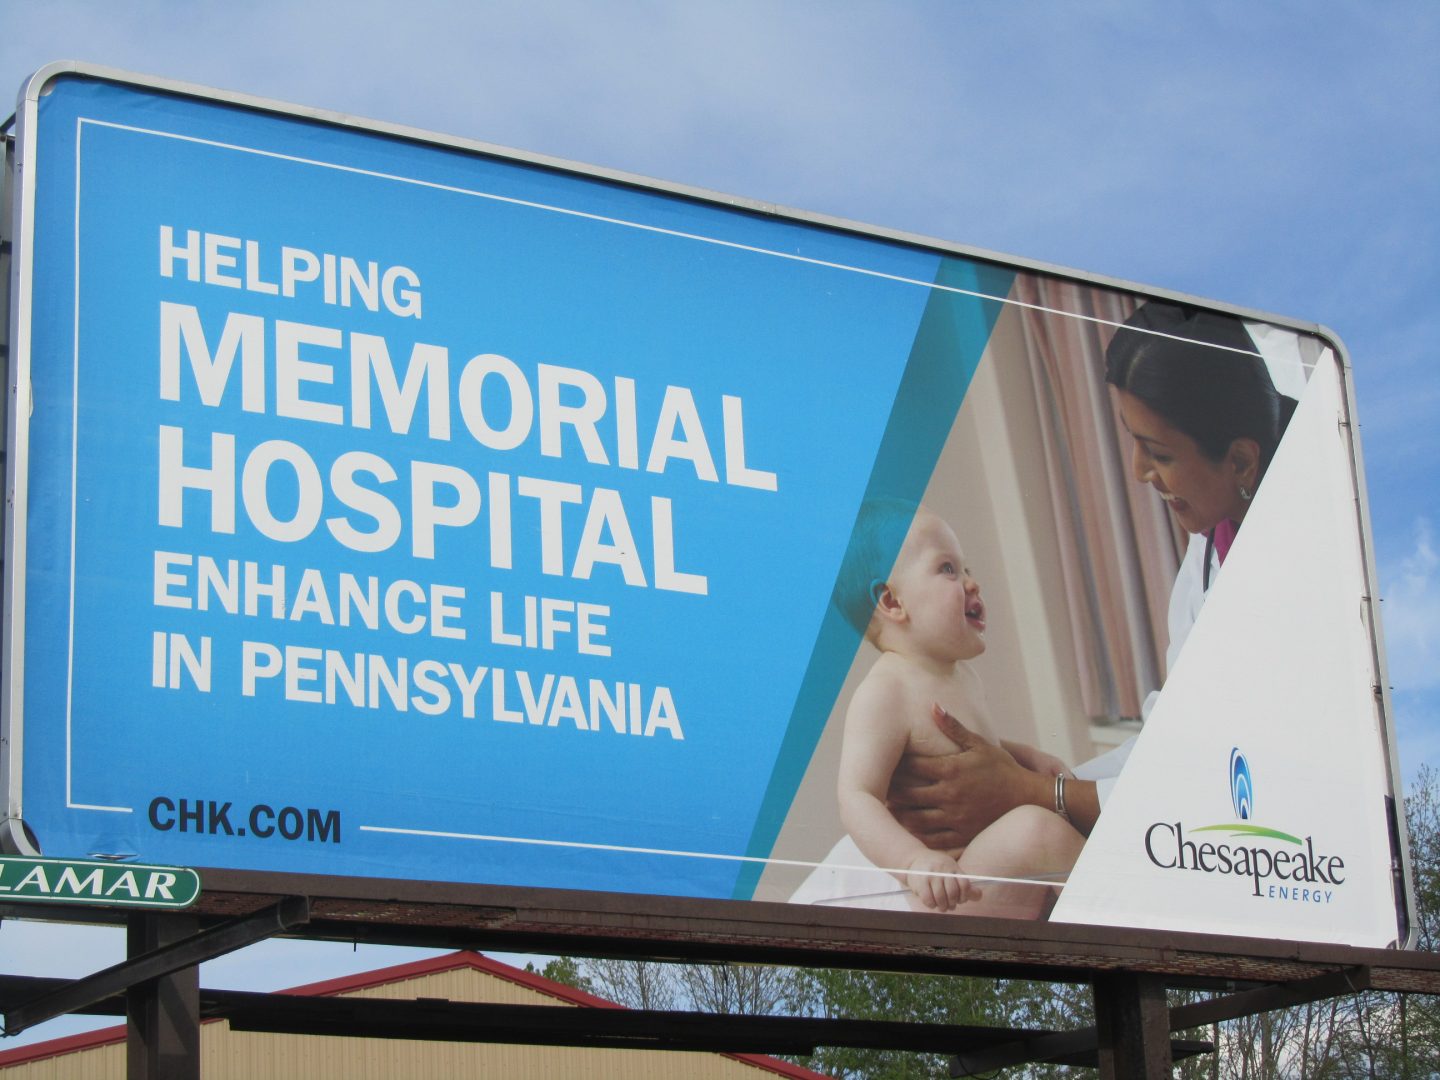 Chesapeake Energy advertises its community support on a billboard in Bradford County, Pa.